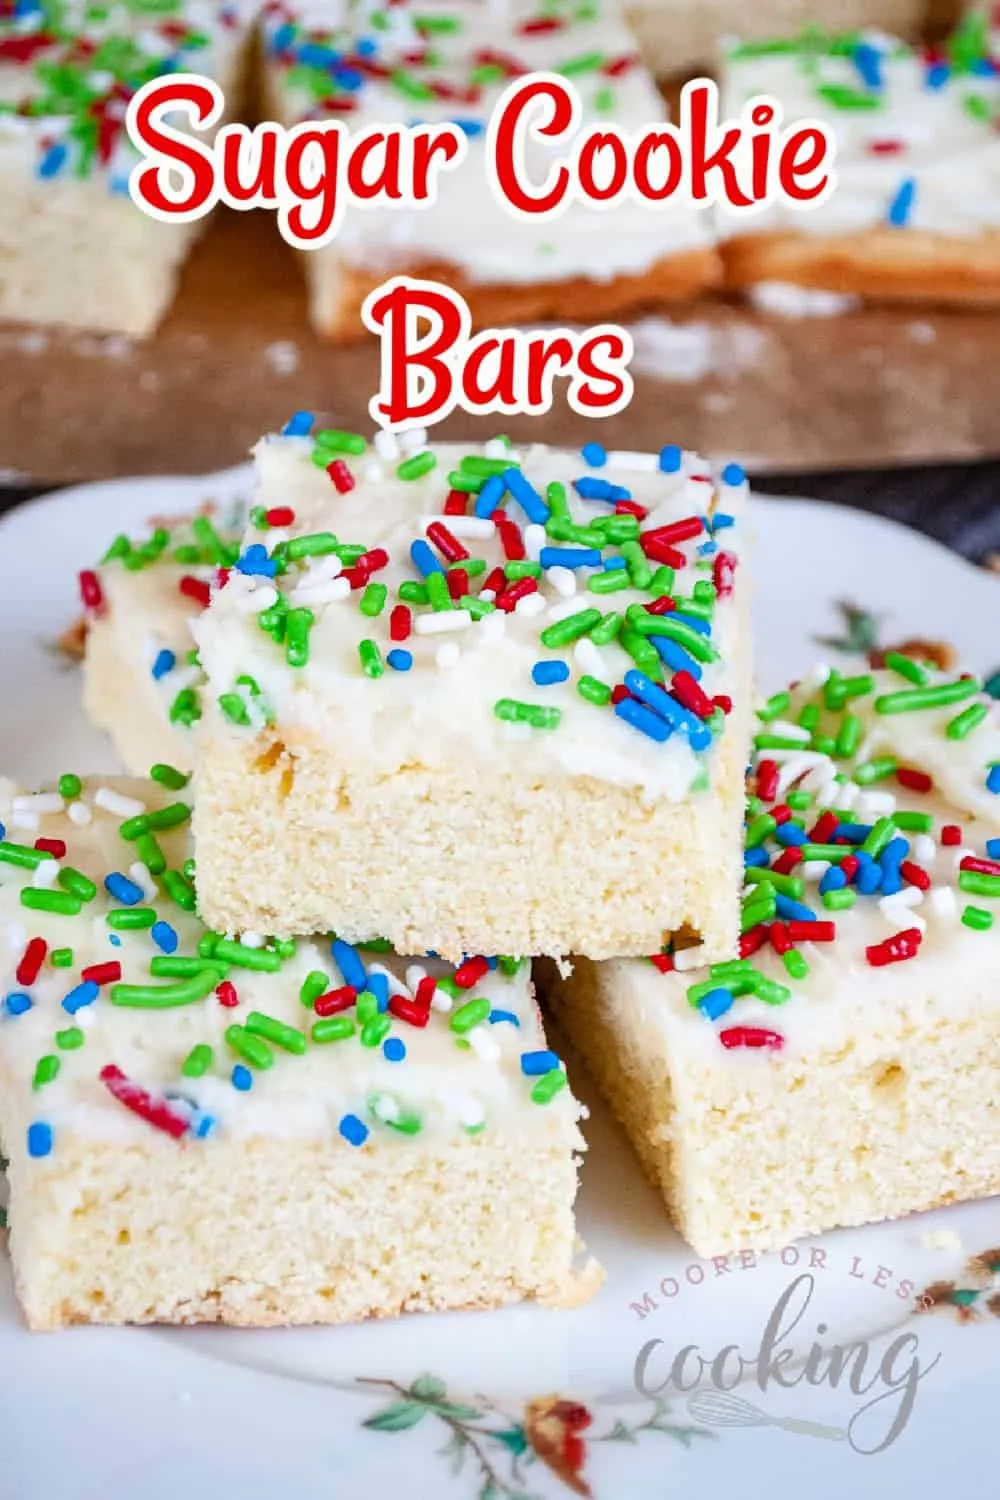 These Sugar Cookie Bars are a soft, sweet, and chewy vanilla crumb layer topped with a buttercream frosting and decorated with sprinkles. These delectable bars taste just like your favorite sugar cookie, but with a slathering of sweet and buttery icing. via @Mooreorlesscook